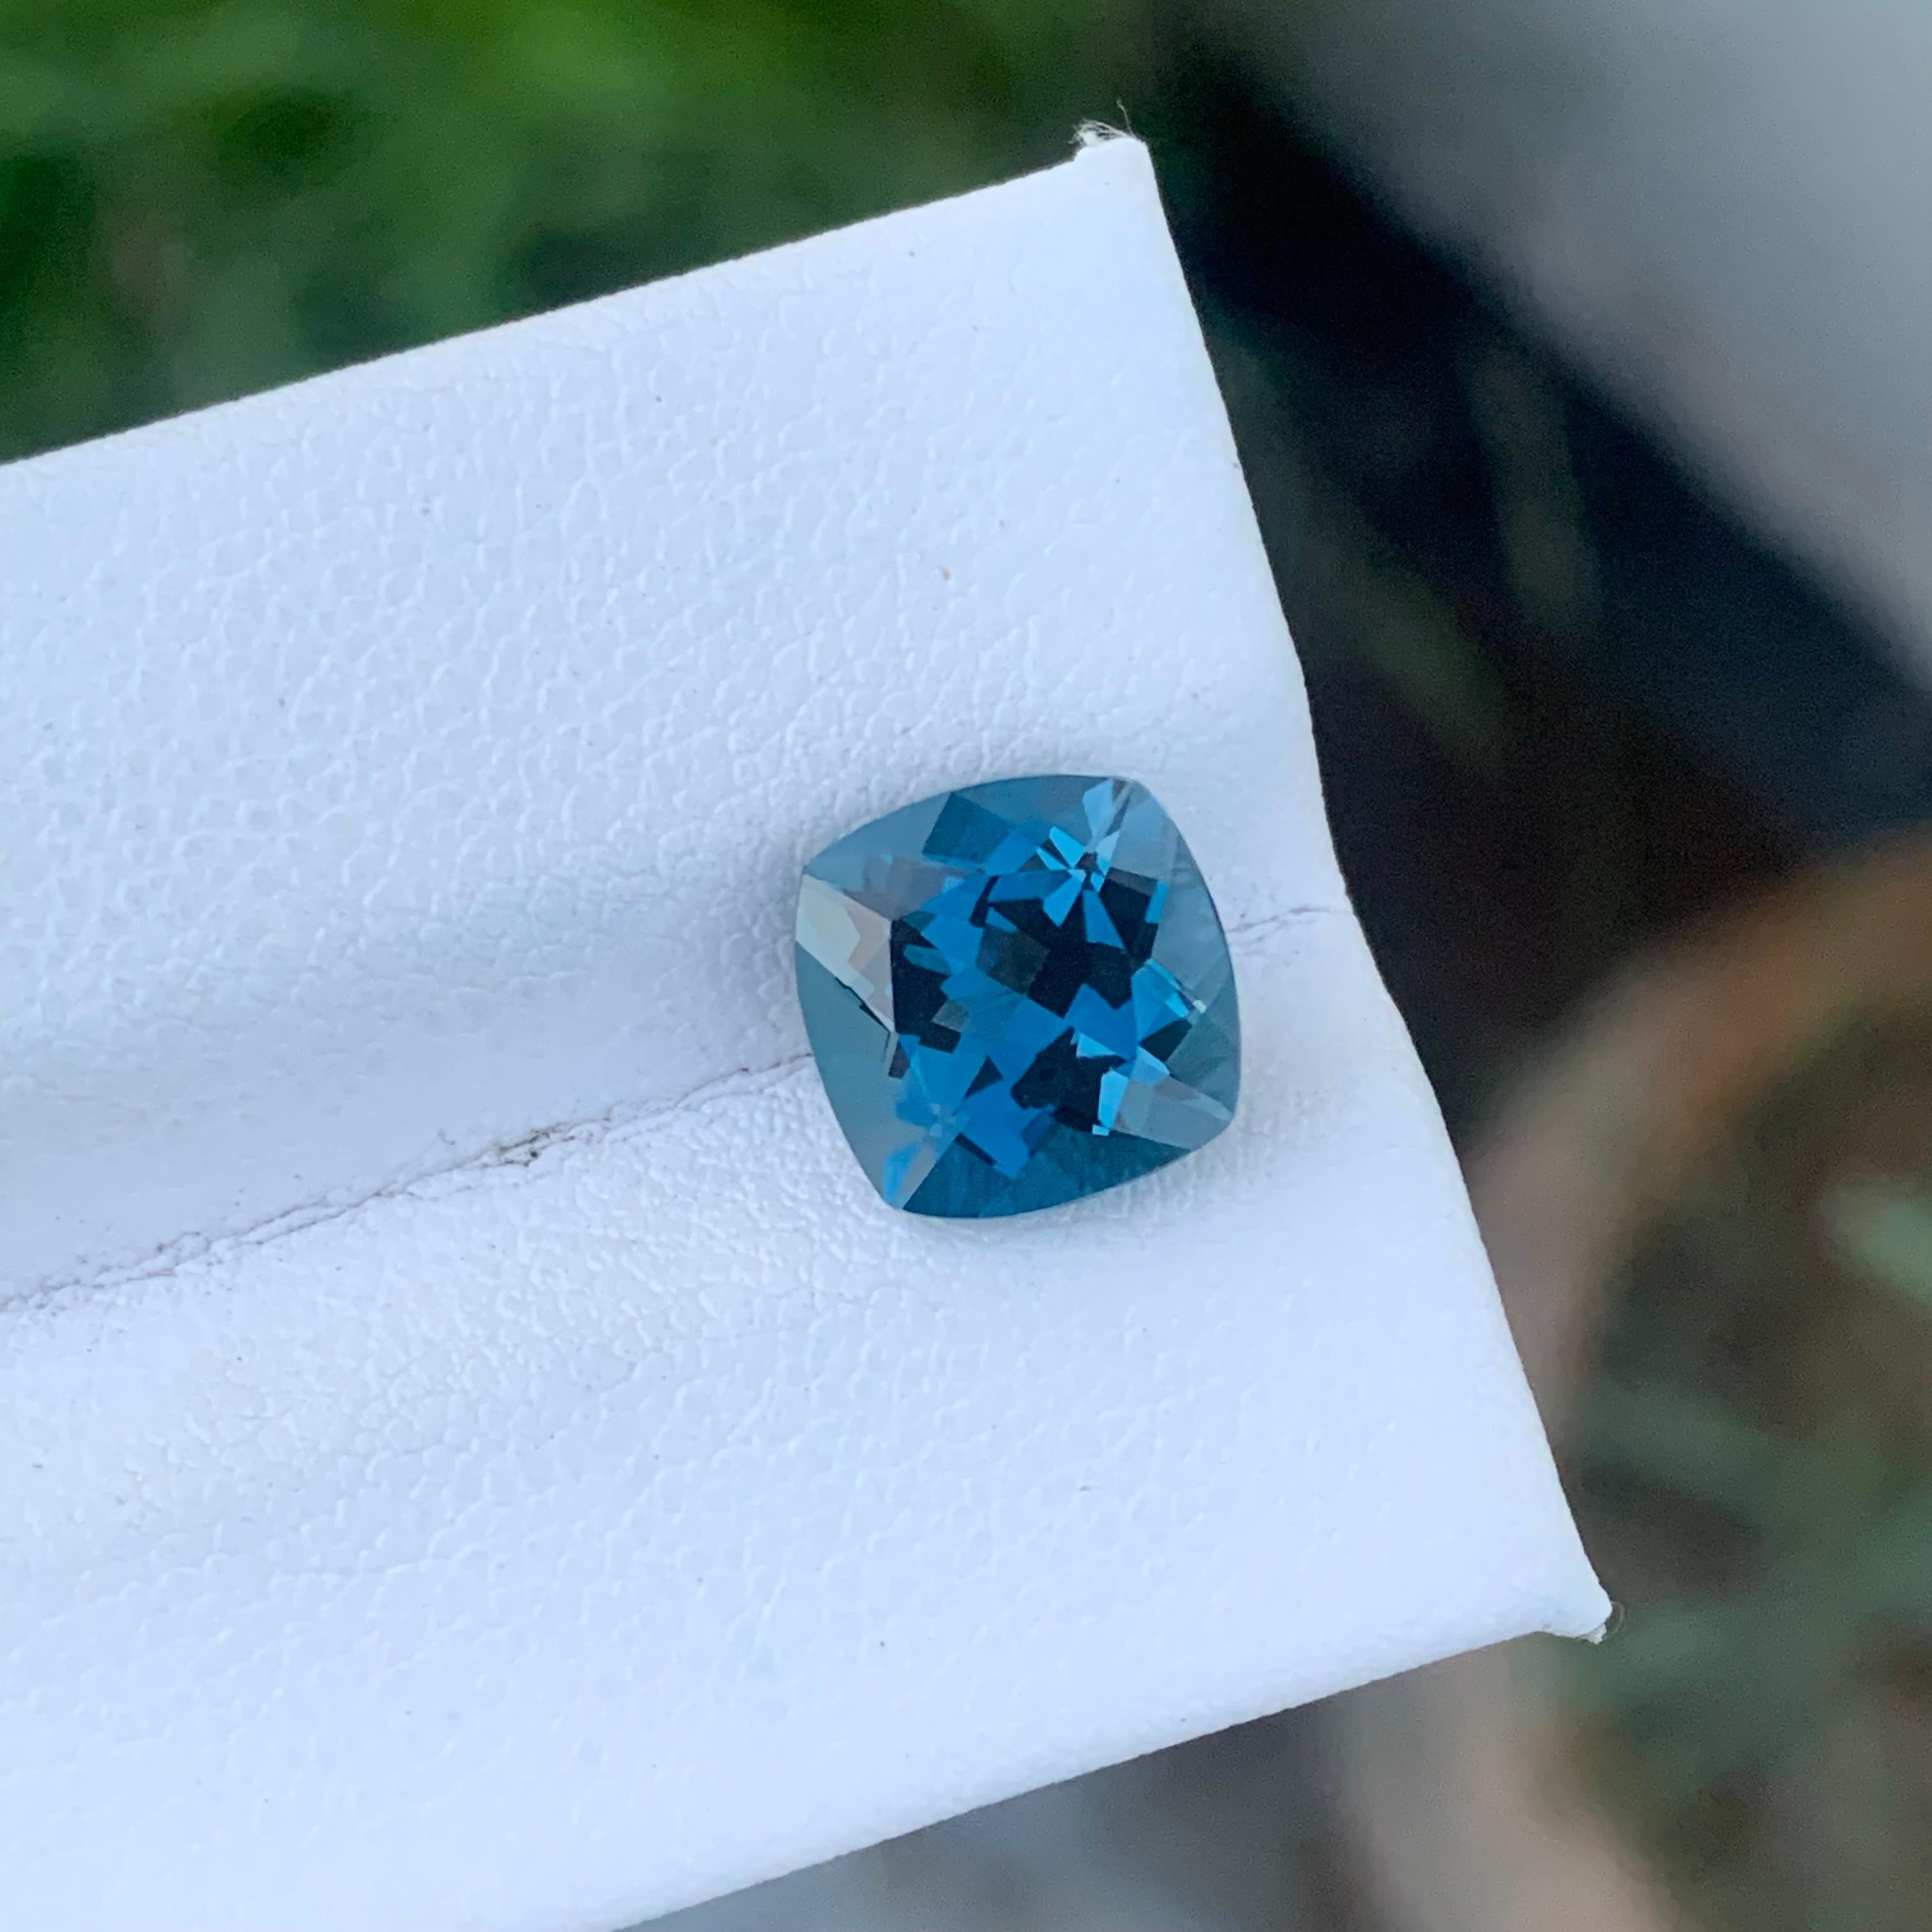 Loose London Blue Topaz

Weight: 3.80 Carats
Dimension: 9.2 x 9.2 x 5.8 Mm
Origin: Brazil
Shape: Square Fancy
Color: Deep Blue
Certificate: On Customer Demand

London Blue Topaz is a mesmerizing variety of topaz renowned for its deep and enchanting